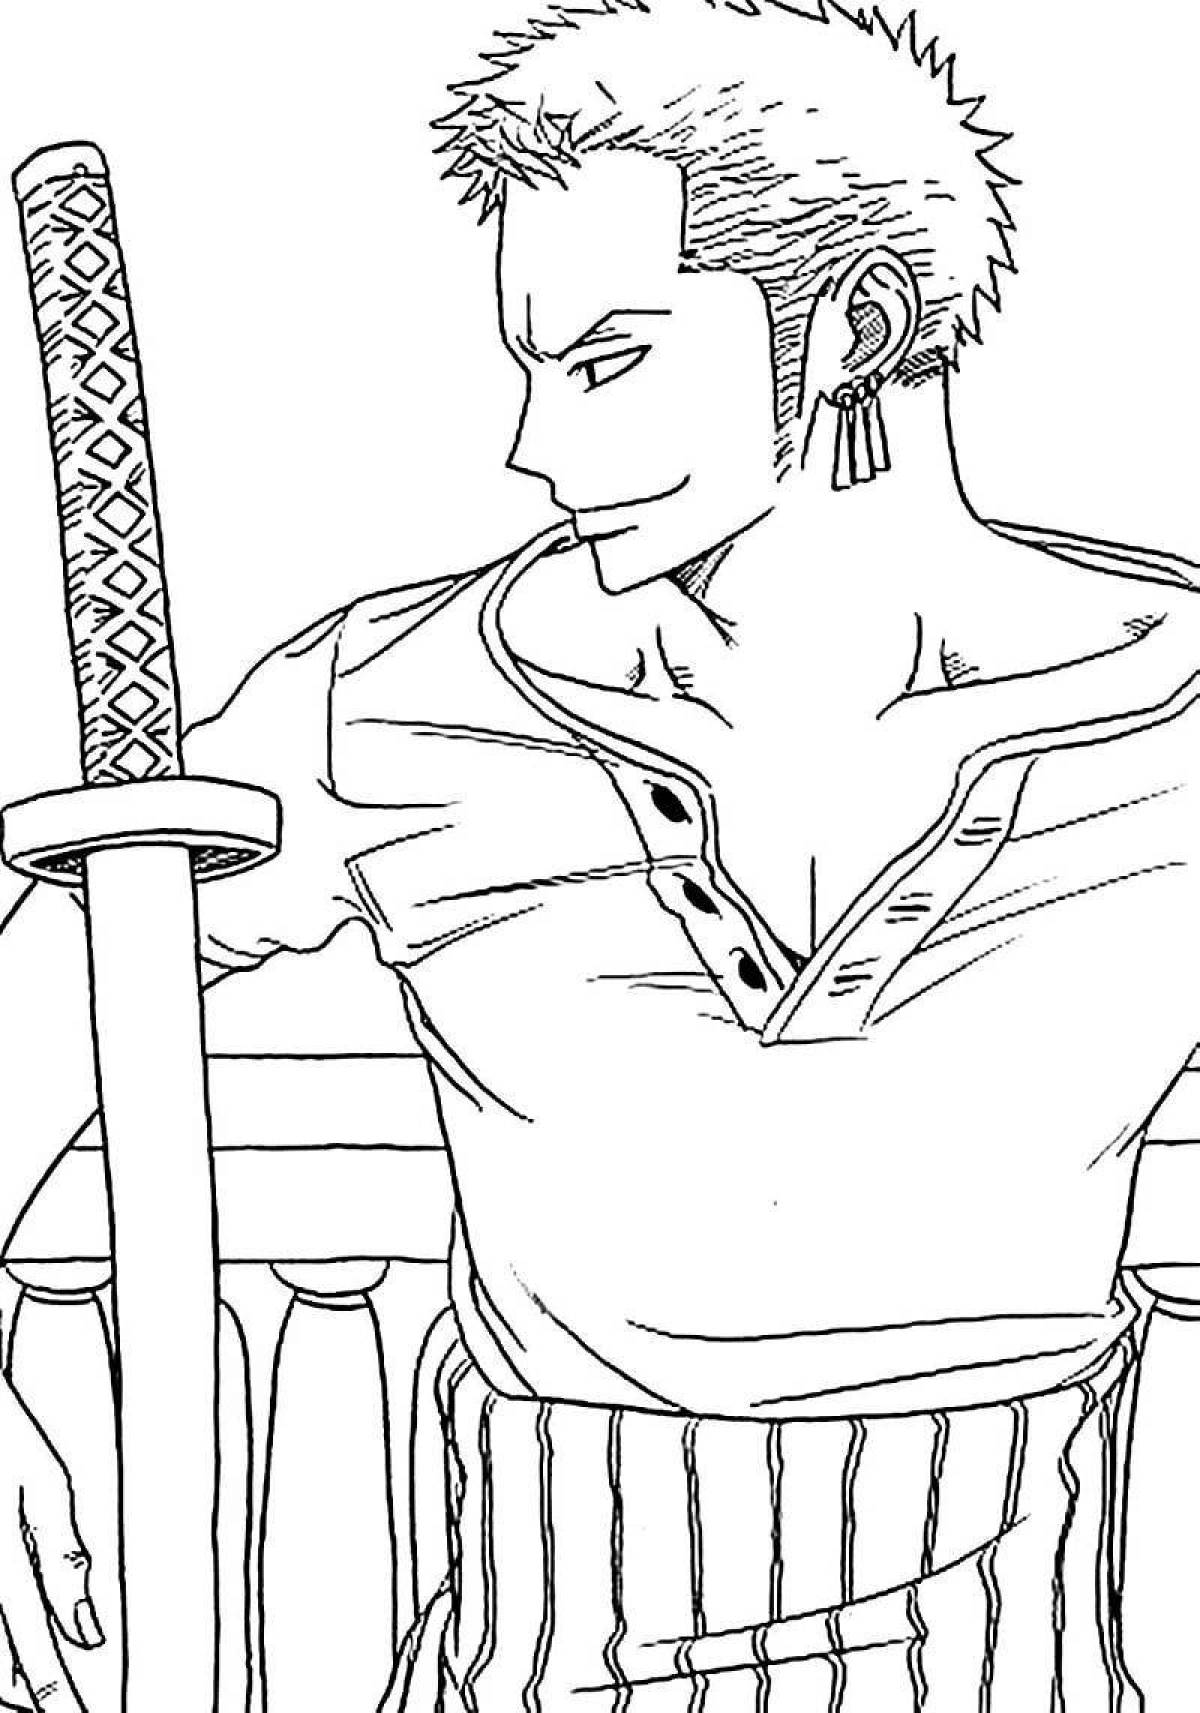 Zoro's playful coloring page